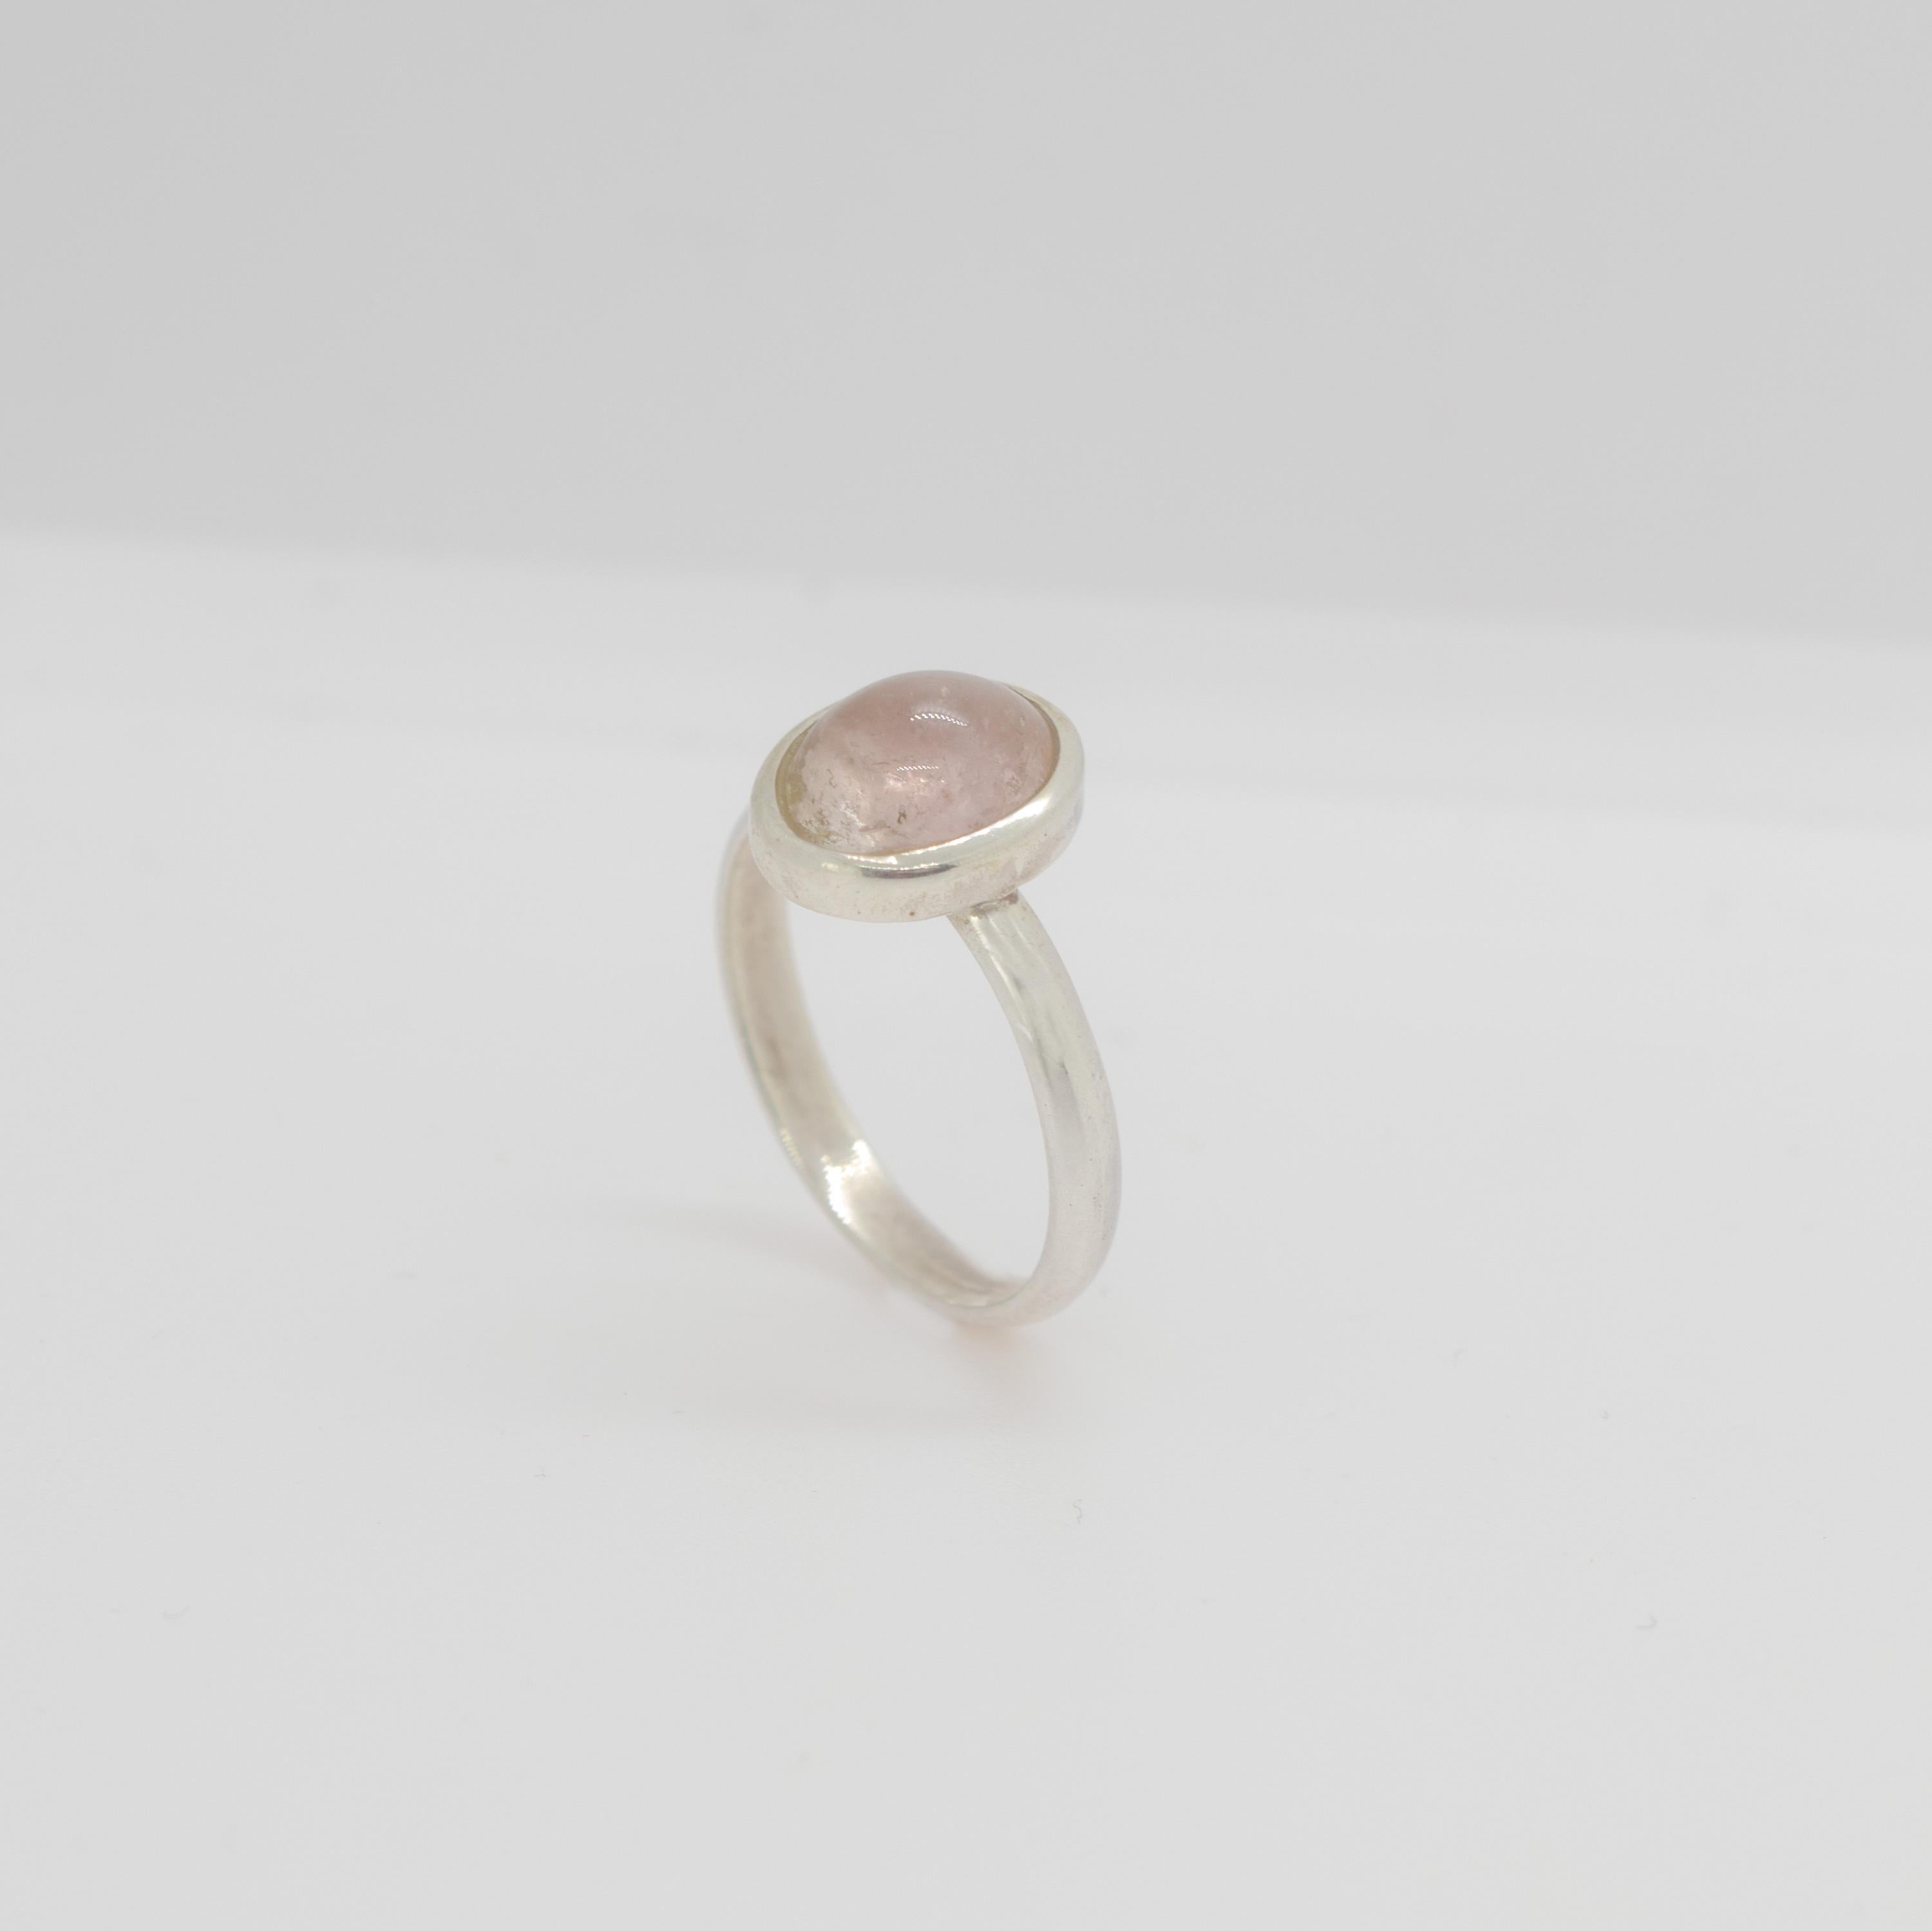 Pink tourmaline gemstone with an oval cabochon design embellished in a sterling silver ring. This gem will fill your daily elegant outfits with a modern and simple design. The pink tourmaline ​​represents the stone of love and growth, delight